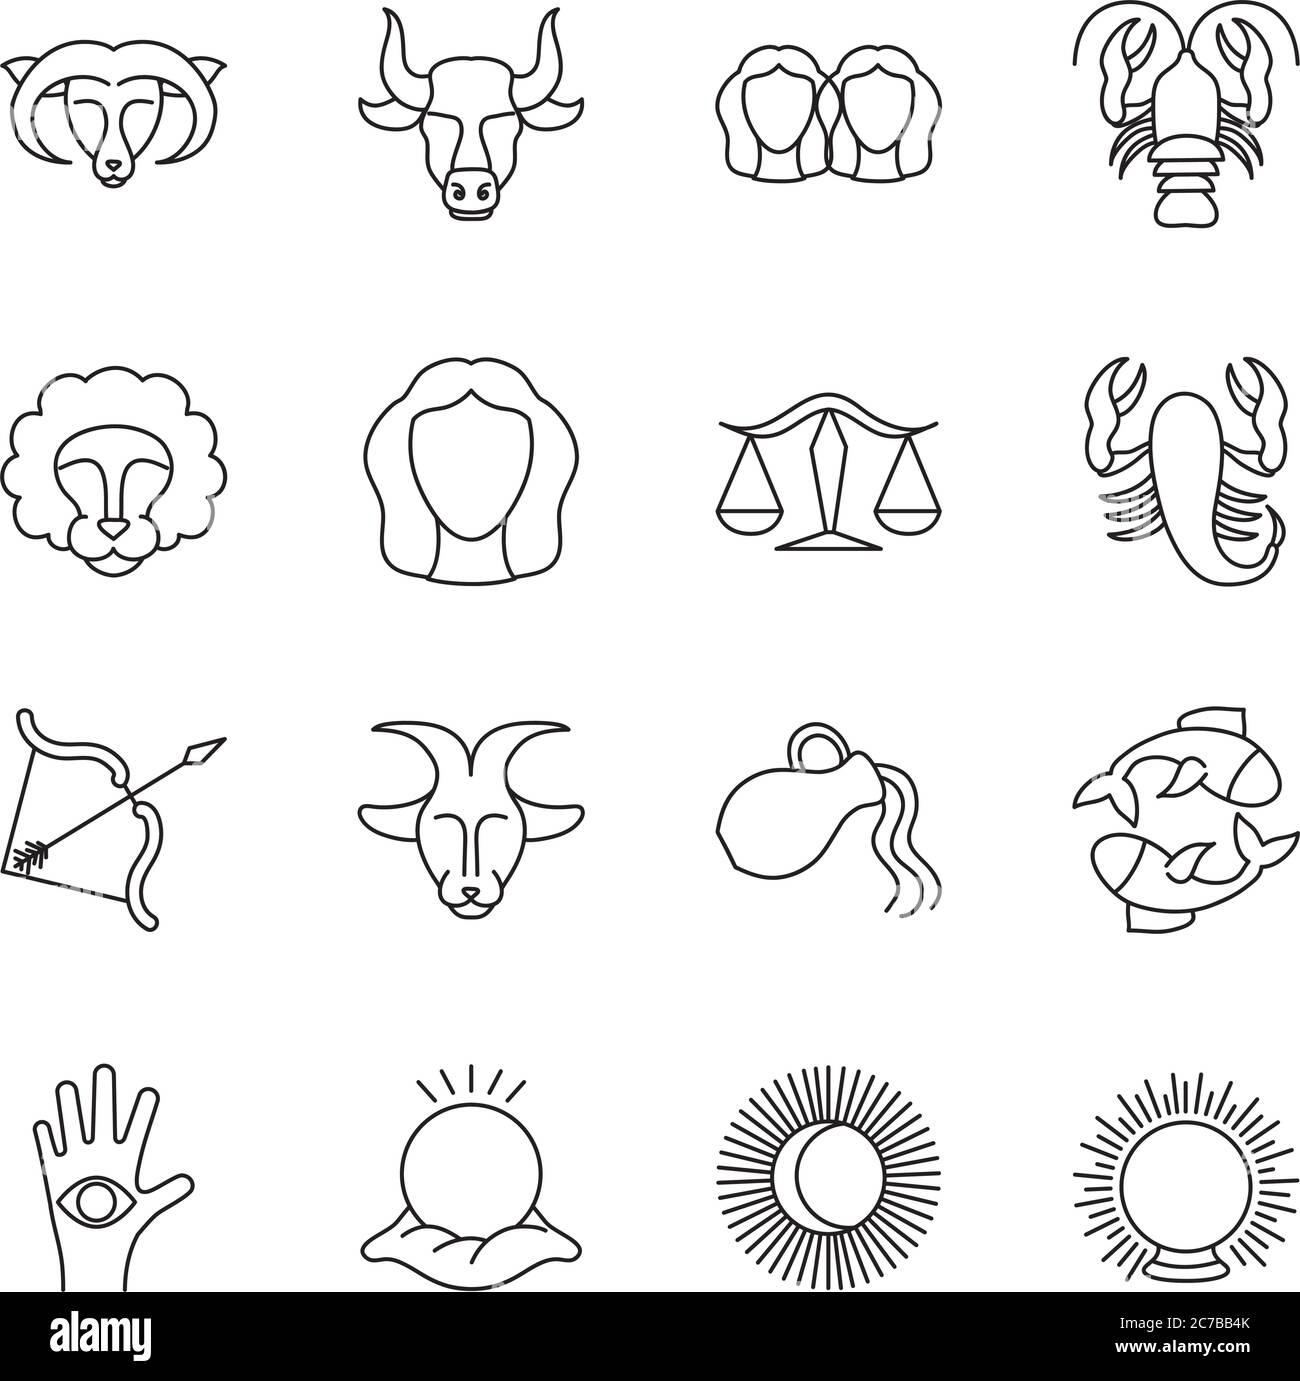 sun and astrology signs icon set over white background, line style, vector illustration Stock Vector